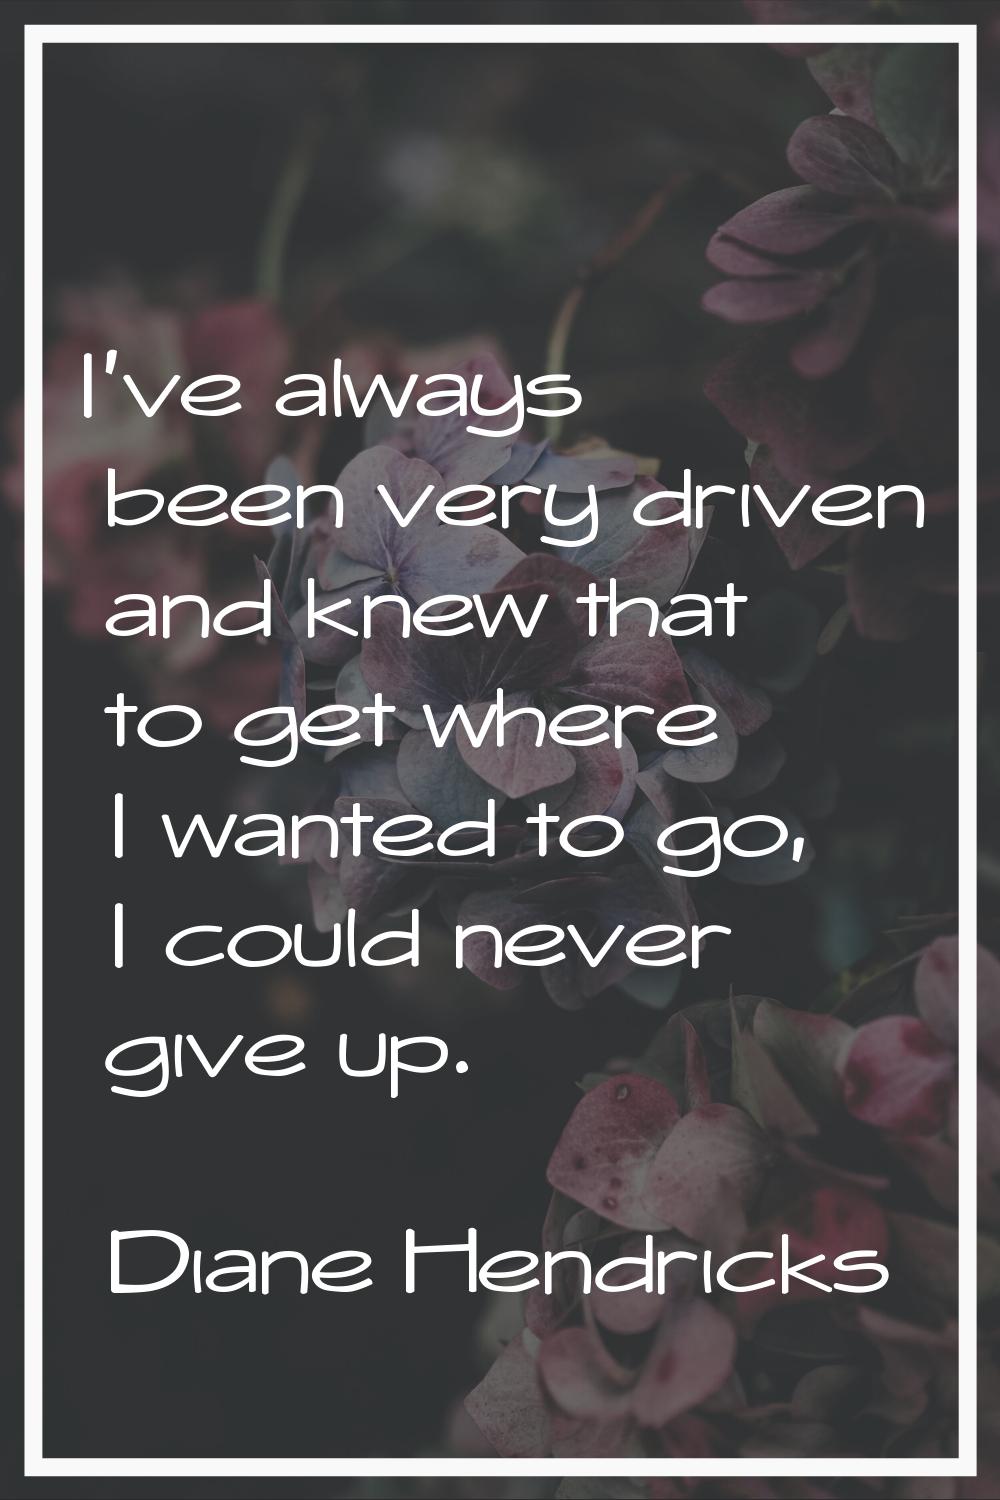 I've always been very driven and knew that to get where I wanted to go, I could never give up.